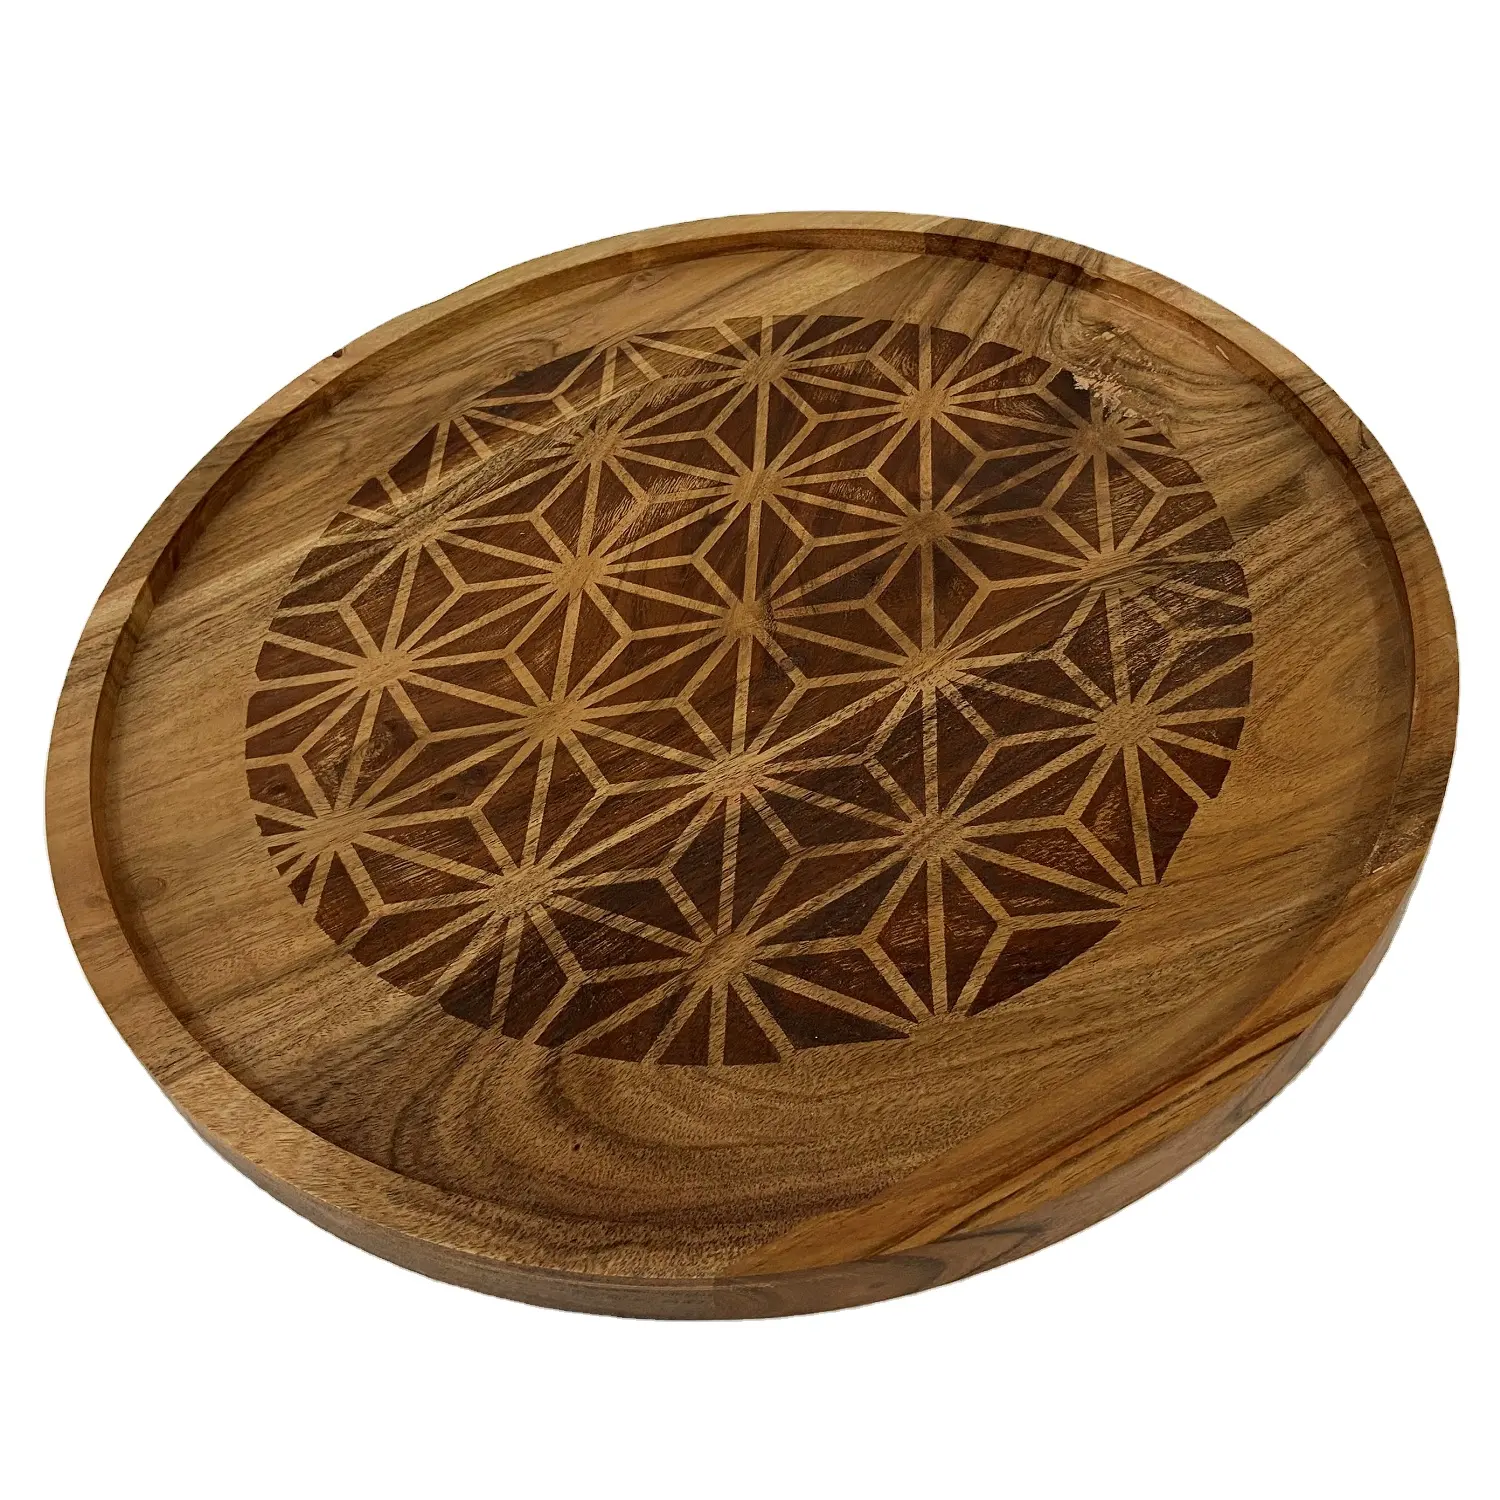 New arrival Wooden Tray with burn design Amazon top selling products Premium wooden items New charger plates 2022 for sale